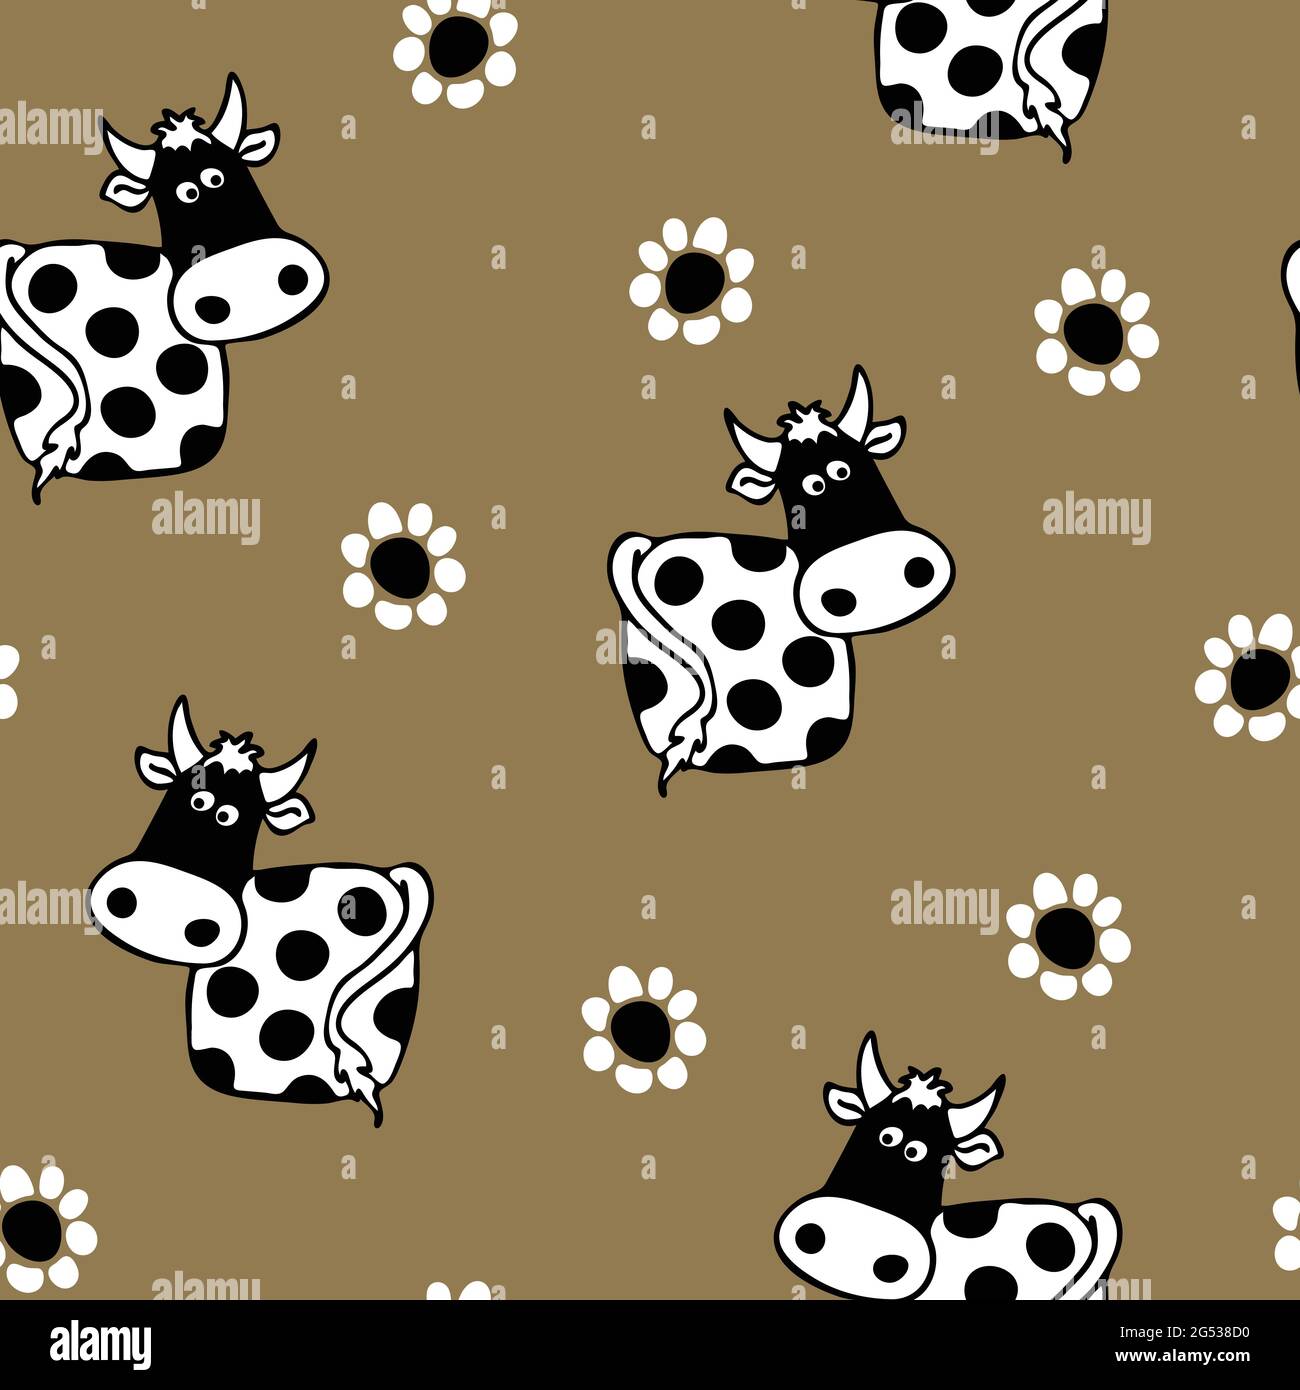 Strawberry Cow wallpaper by ShadowBunny333  Download on ZEDGE  dc63